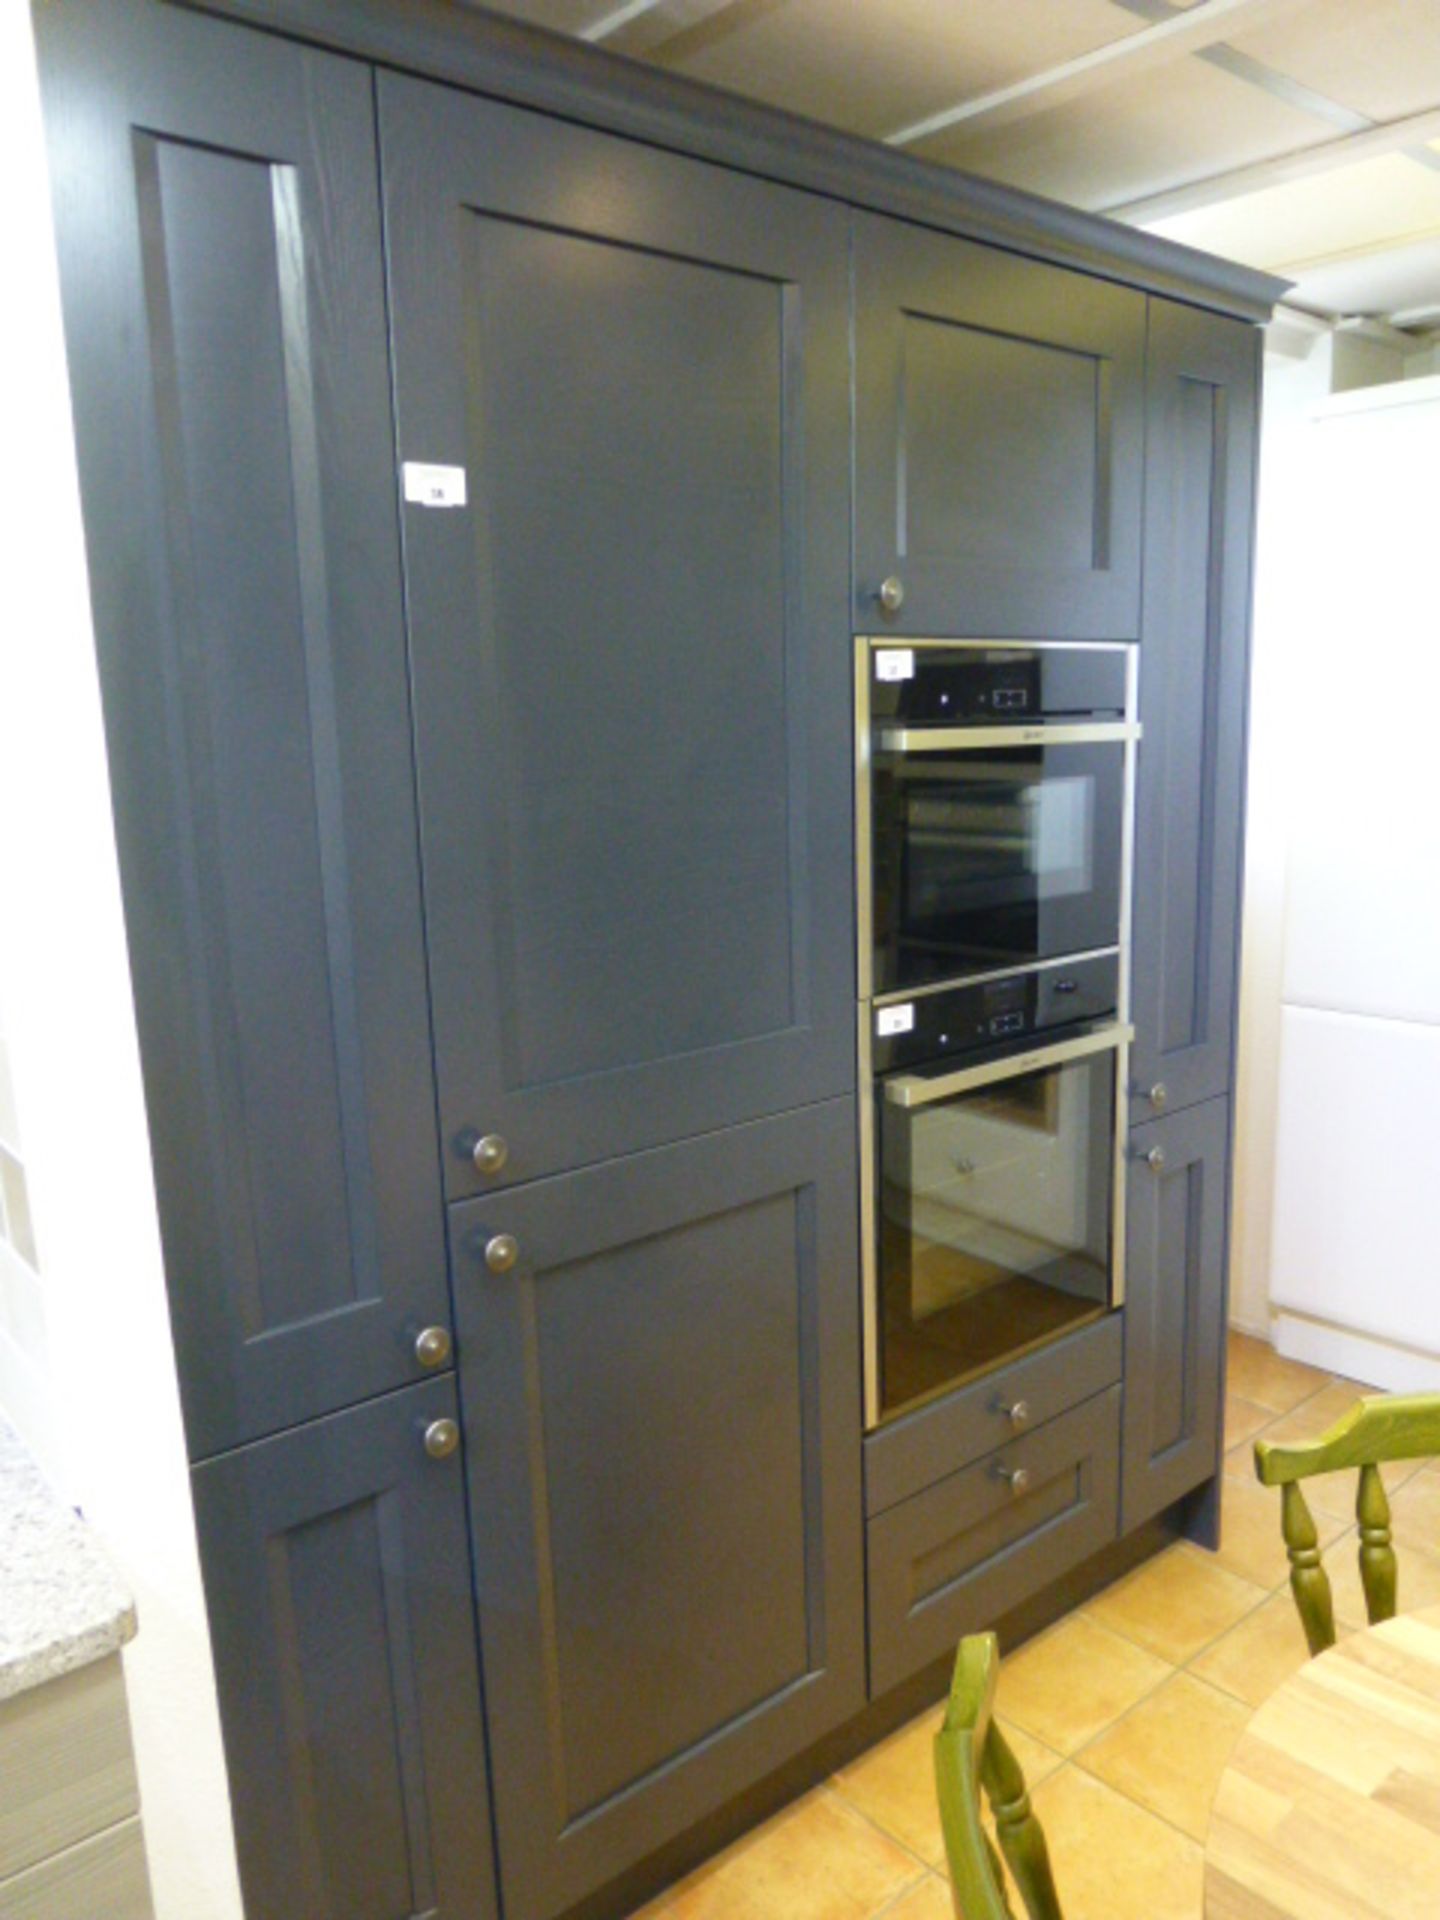 Masterclass Kitchen display approx. 180cm in Midnight blue with sliding storage and a Neff double